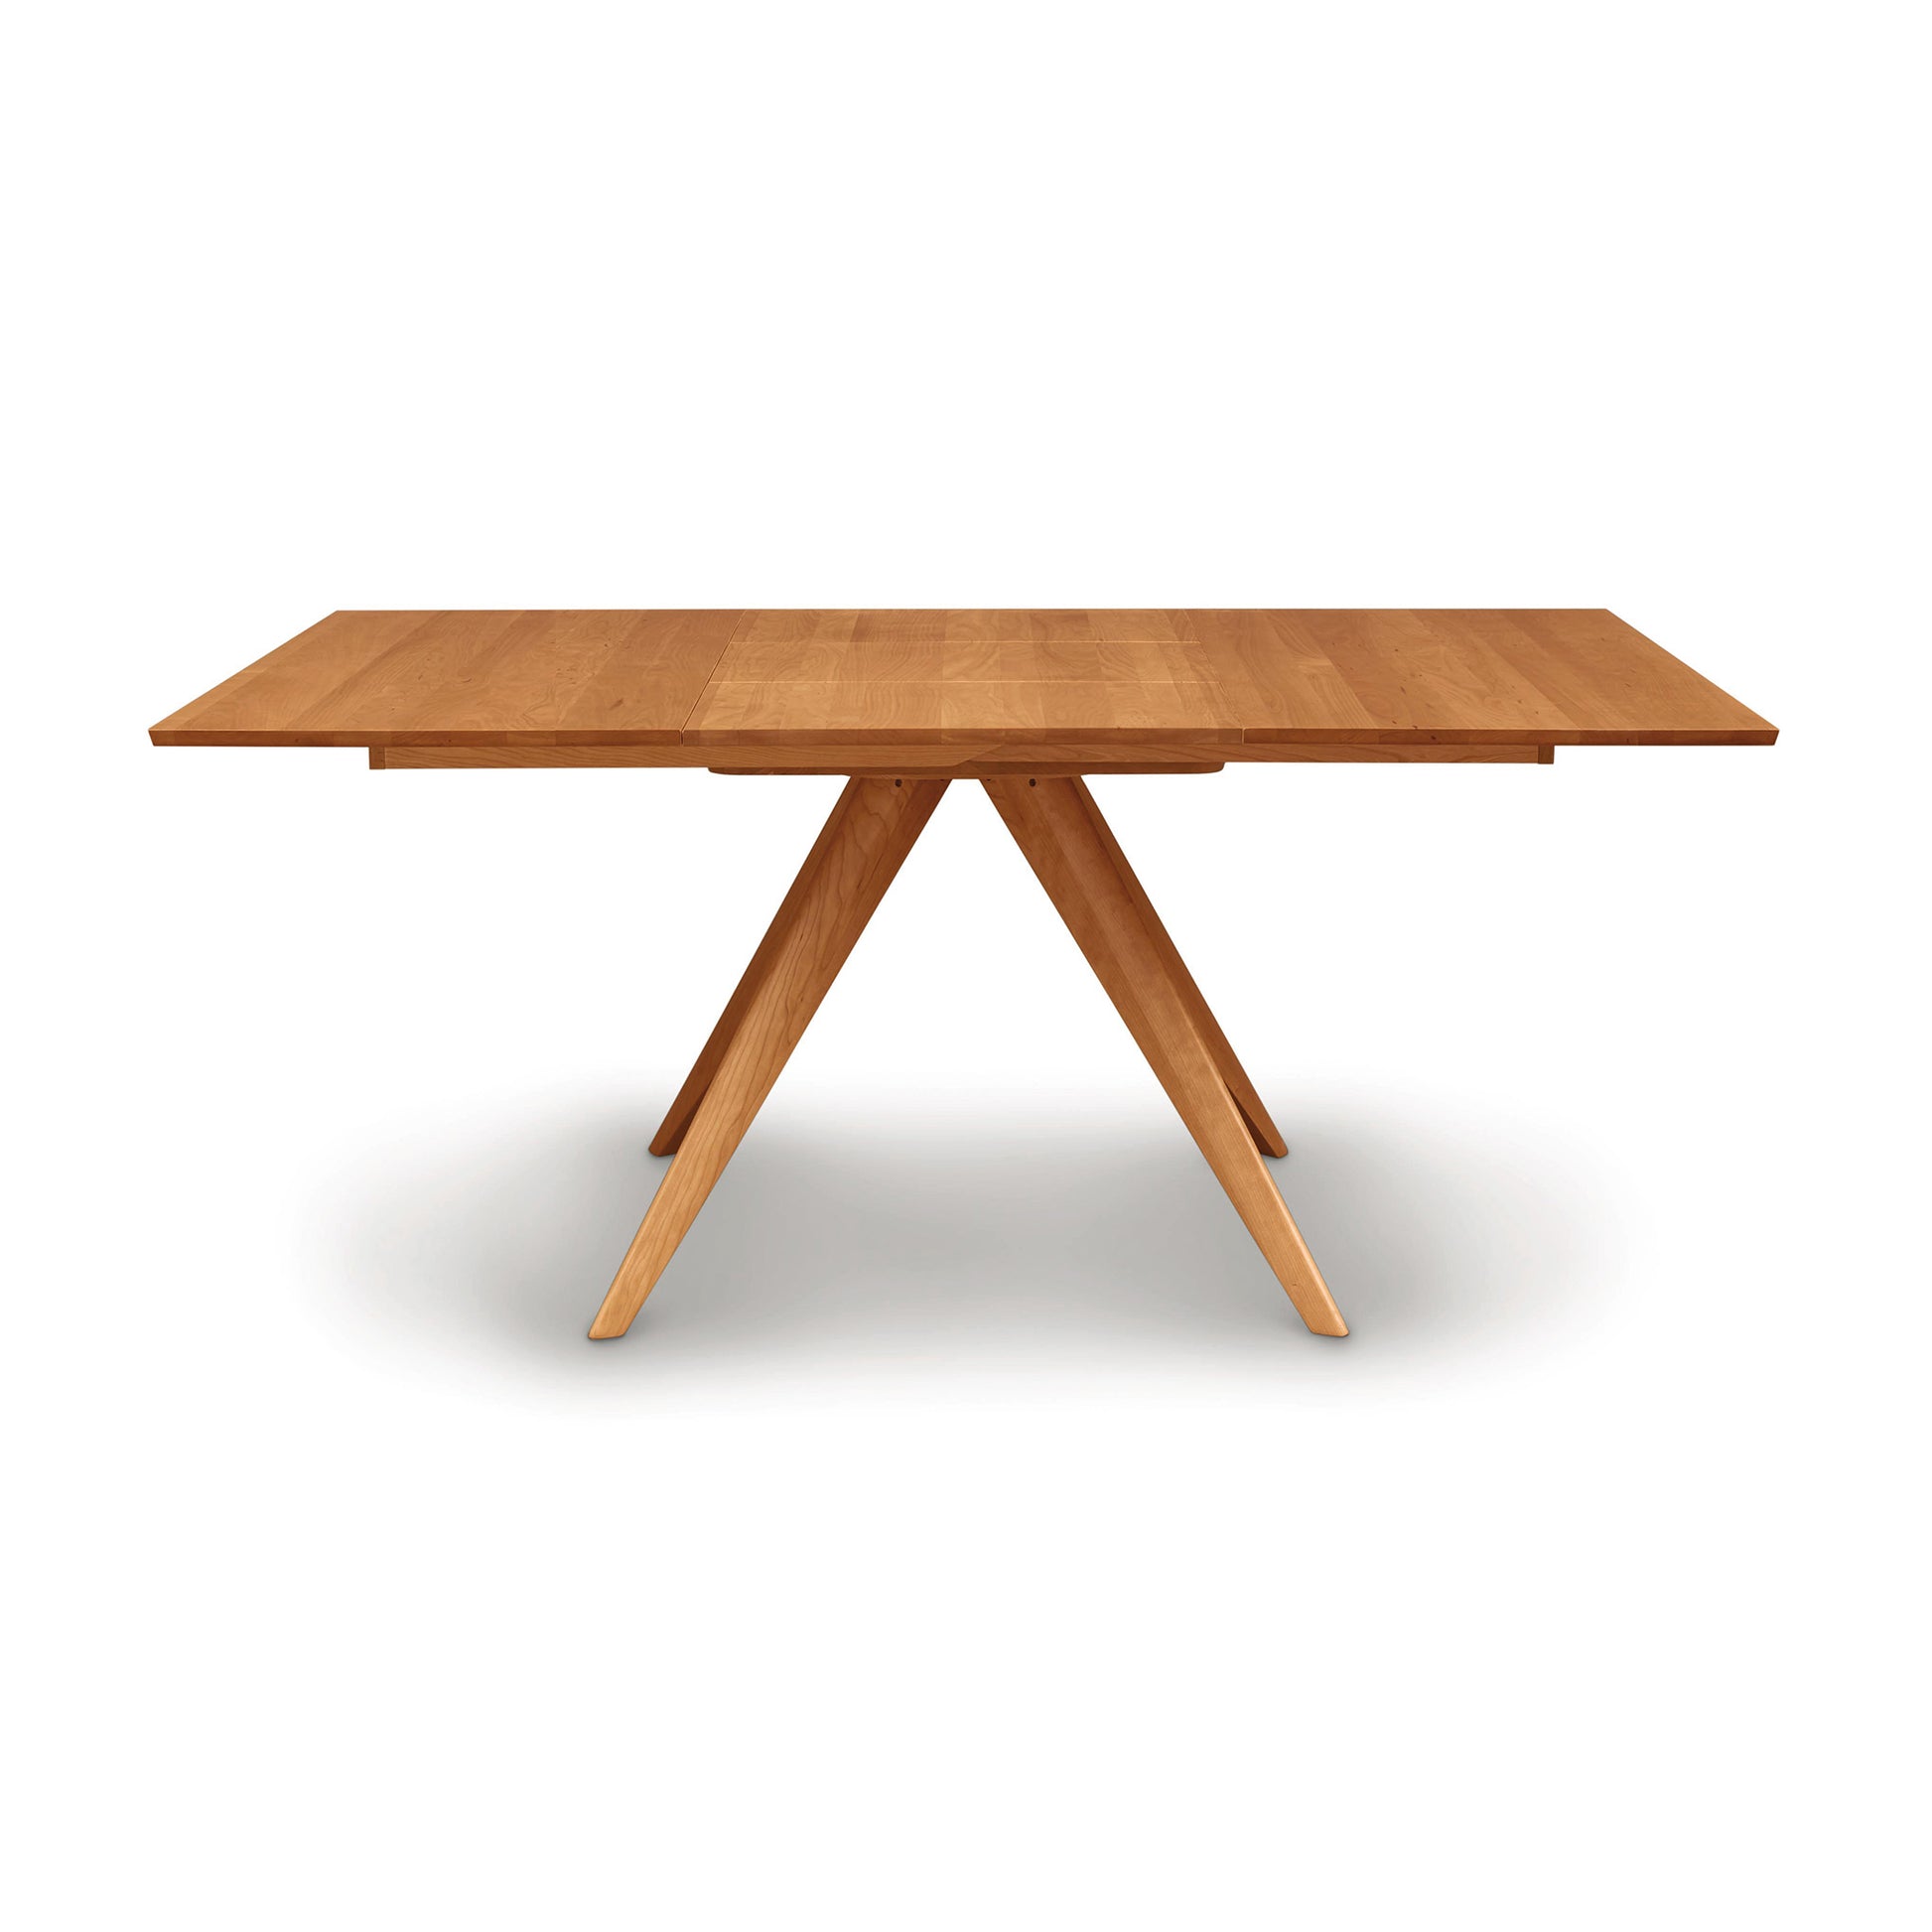 A Copeland Furniture Catalina Square Extension Dining Table with a rectangular top and a central supporting leg that splits into a four-point base, made from sustainably harvested wood, isolated on a white background.